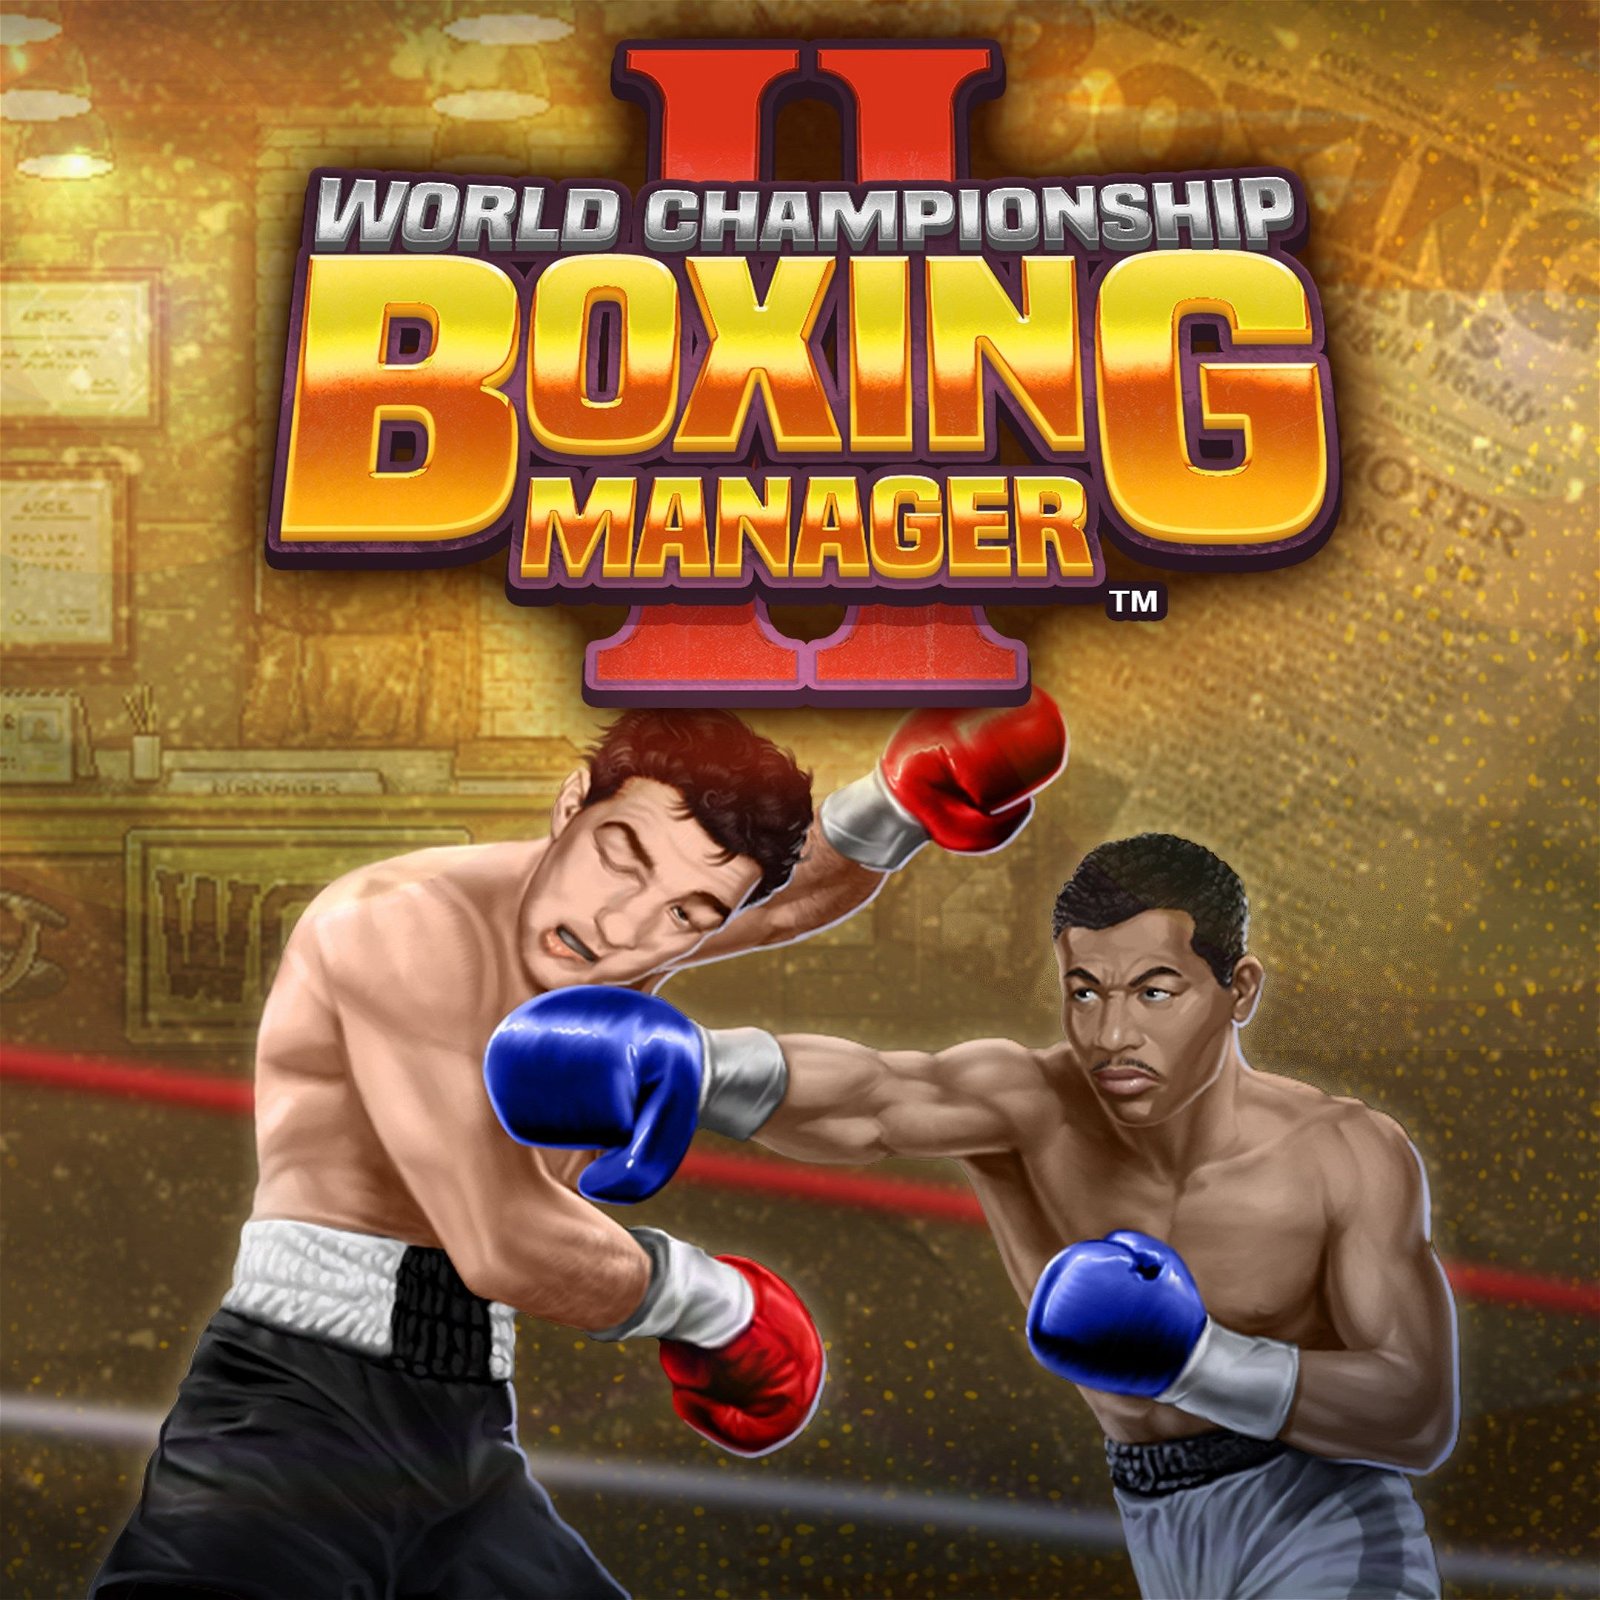 Image of World Championship Boxing Manager 2